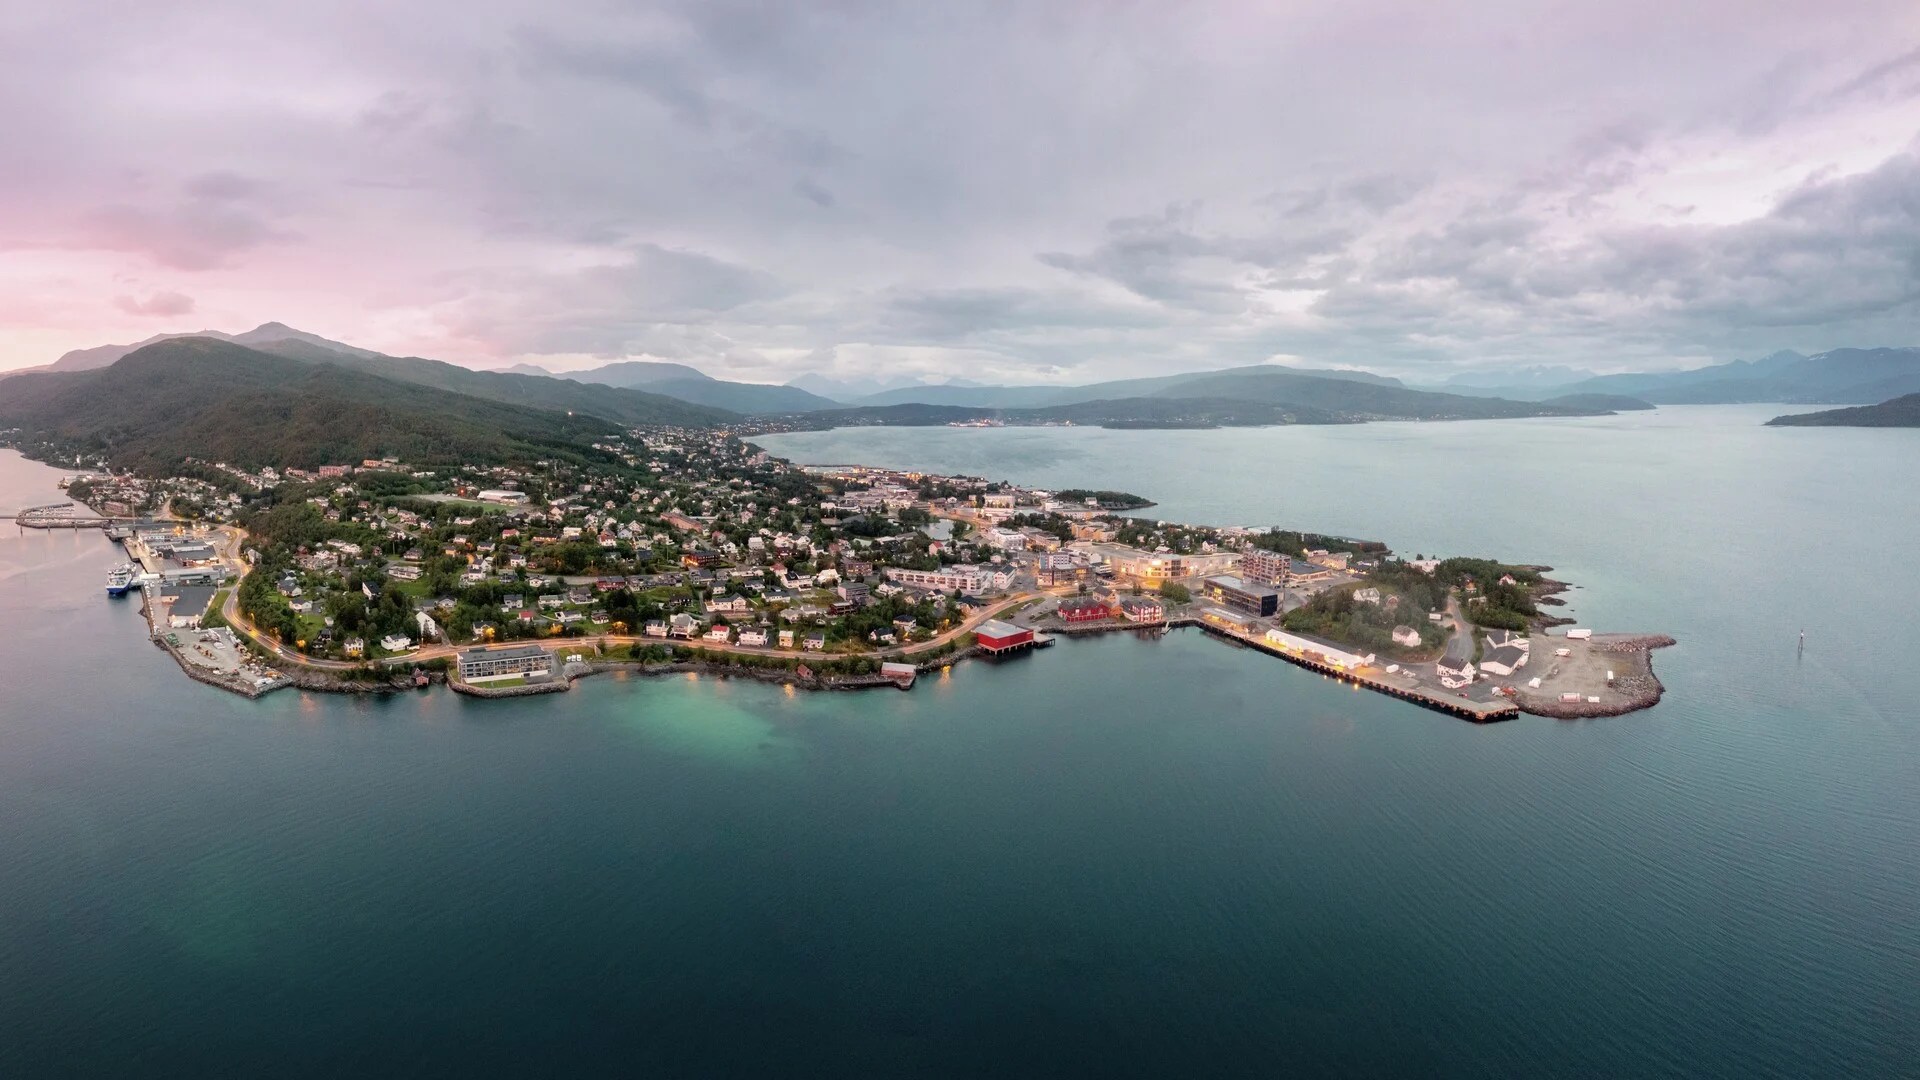 An aerial view of the port town of Finnsnes